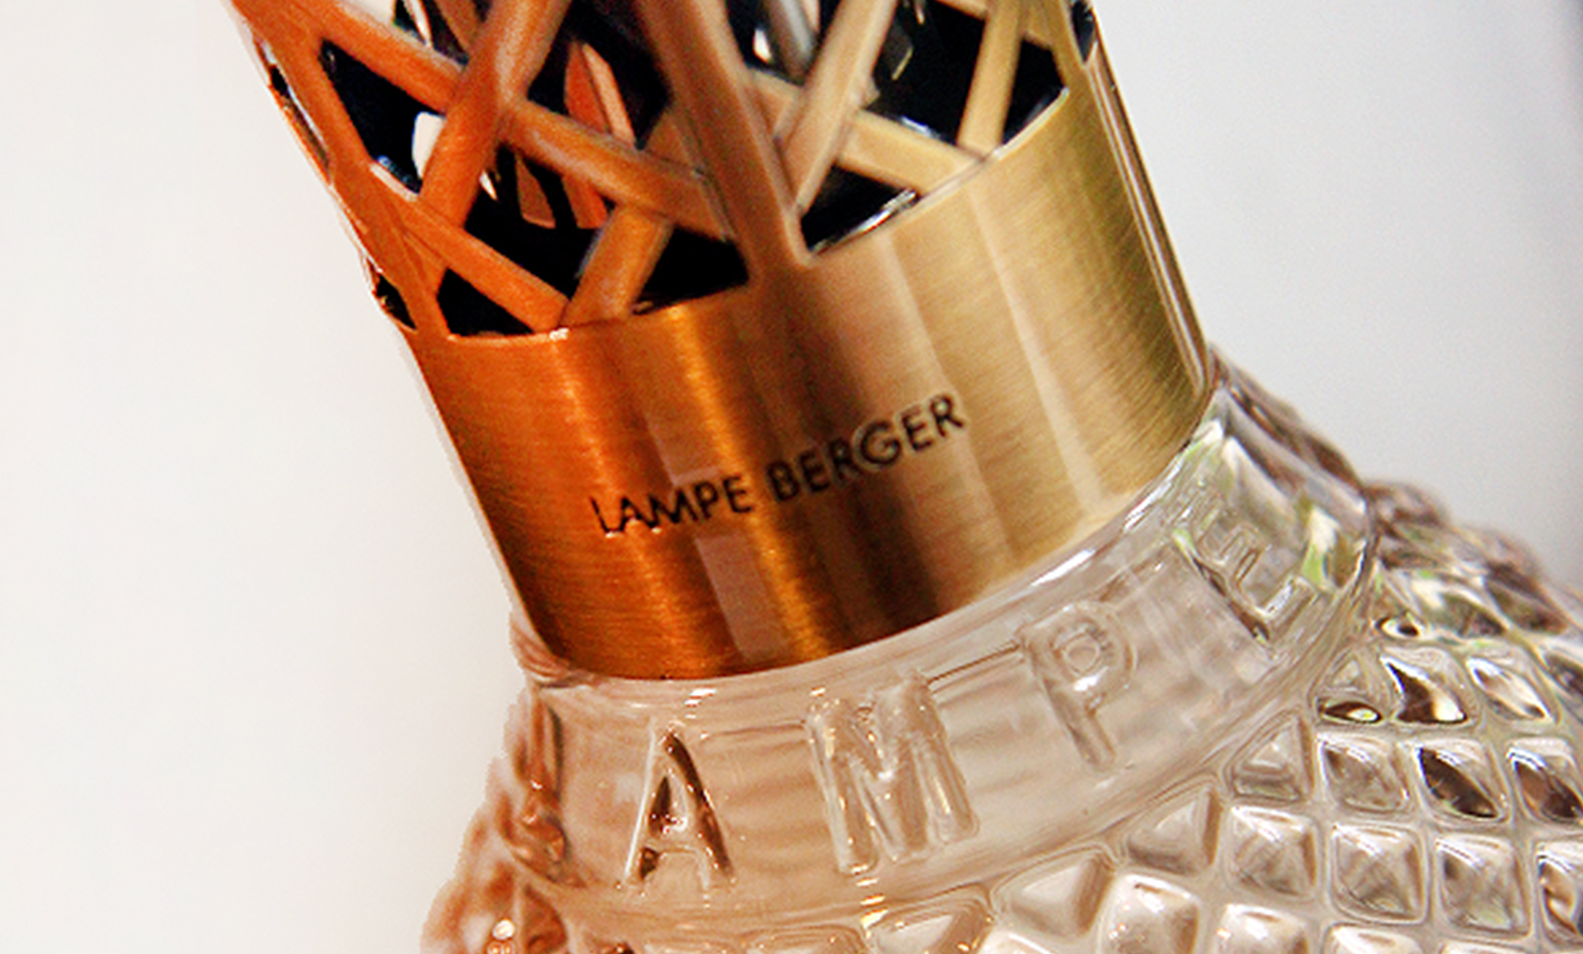 The Right Chemistry: The scientific history behind the Lampe Berger